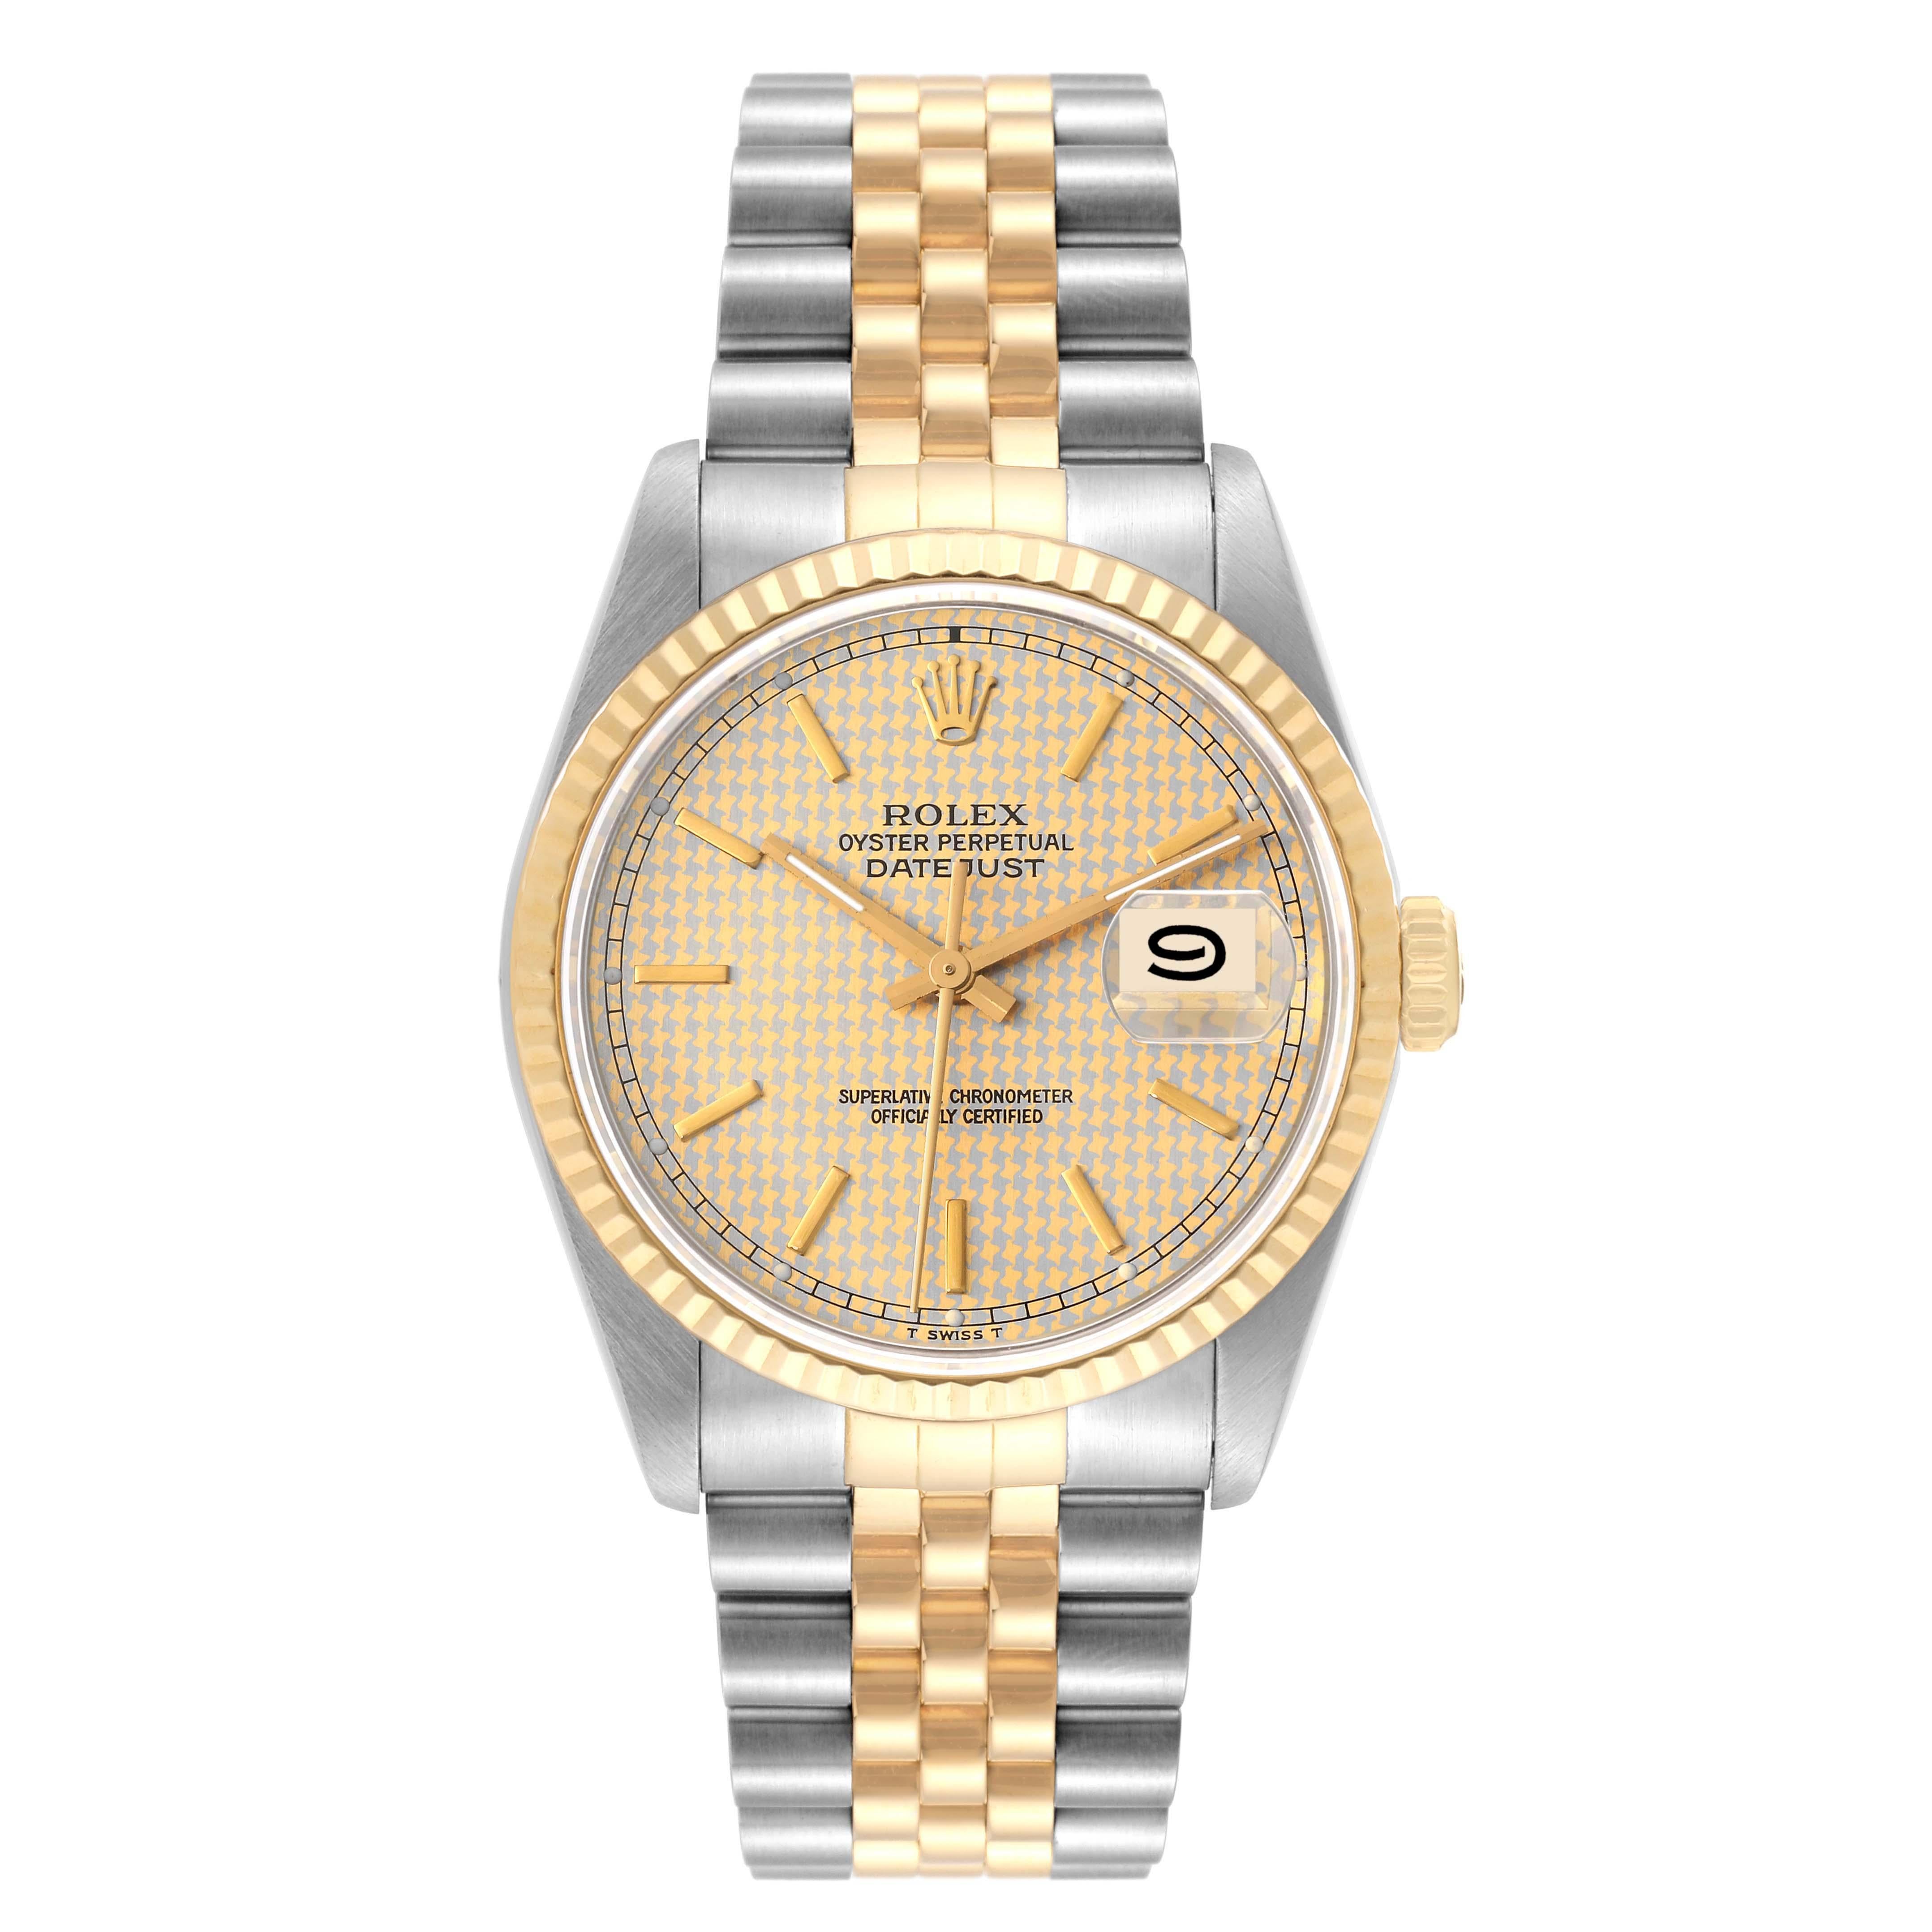 Rolex Datejust Houndstooth Dial Steel Yellow Gold Mens Watch 16233. Officially certified chronometer automatic self-winding movement. Stainless steel case 36 mm in diameter.  Rolex logo on an 18K yellow gold crown. 18k yellow gold fluted bezel.